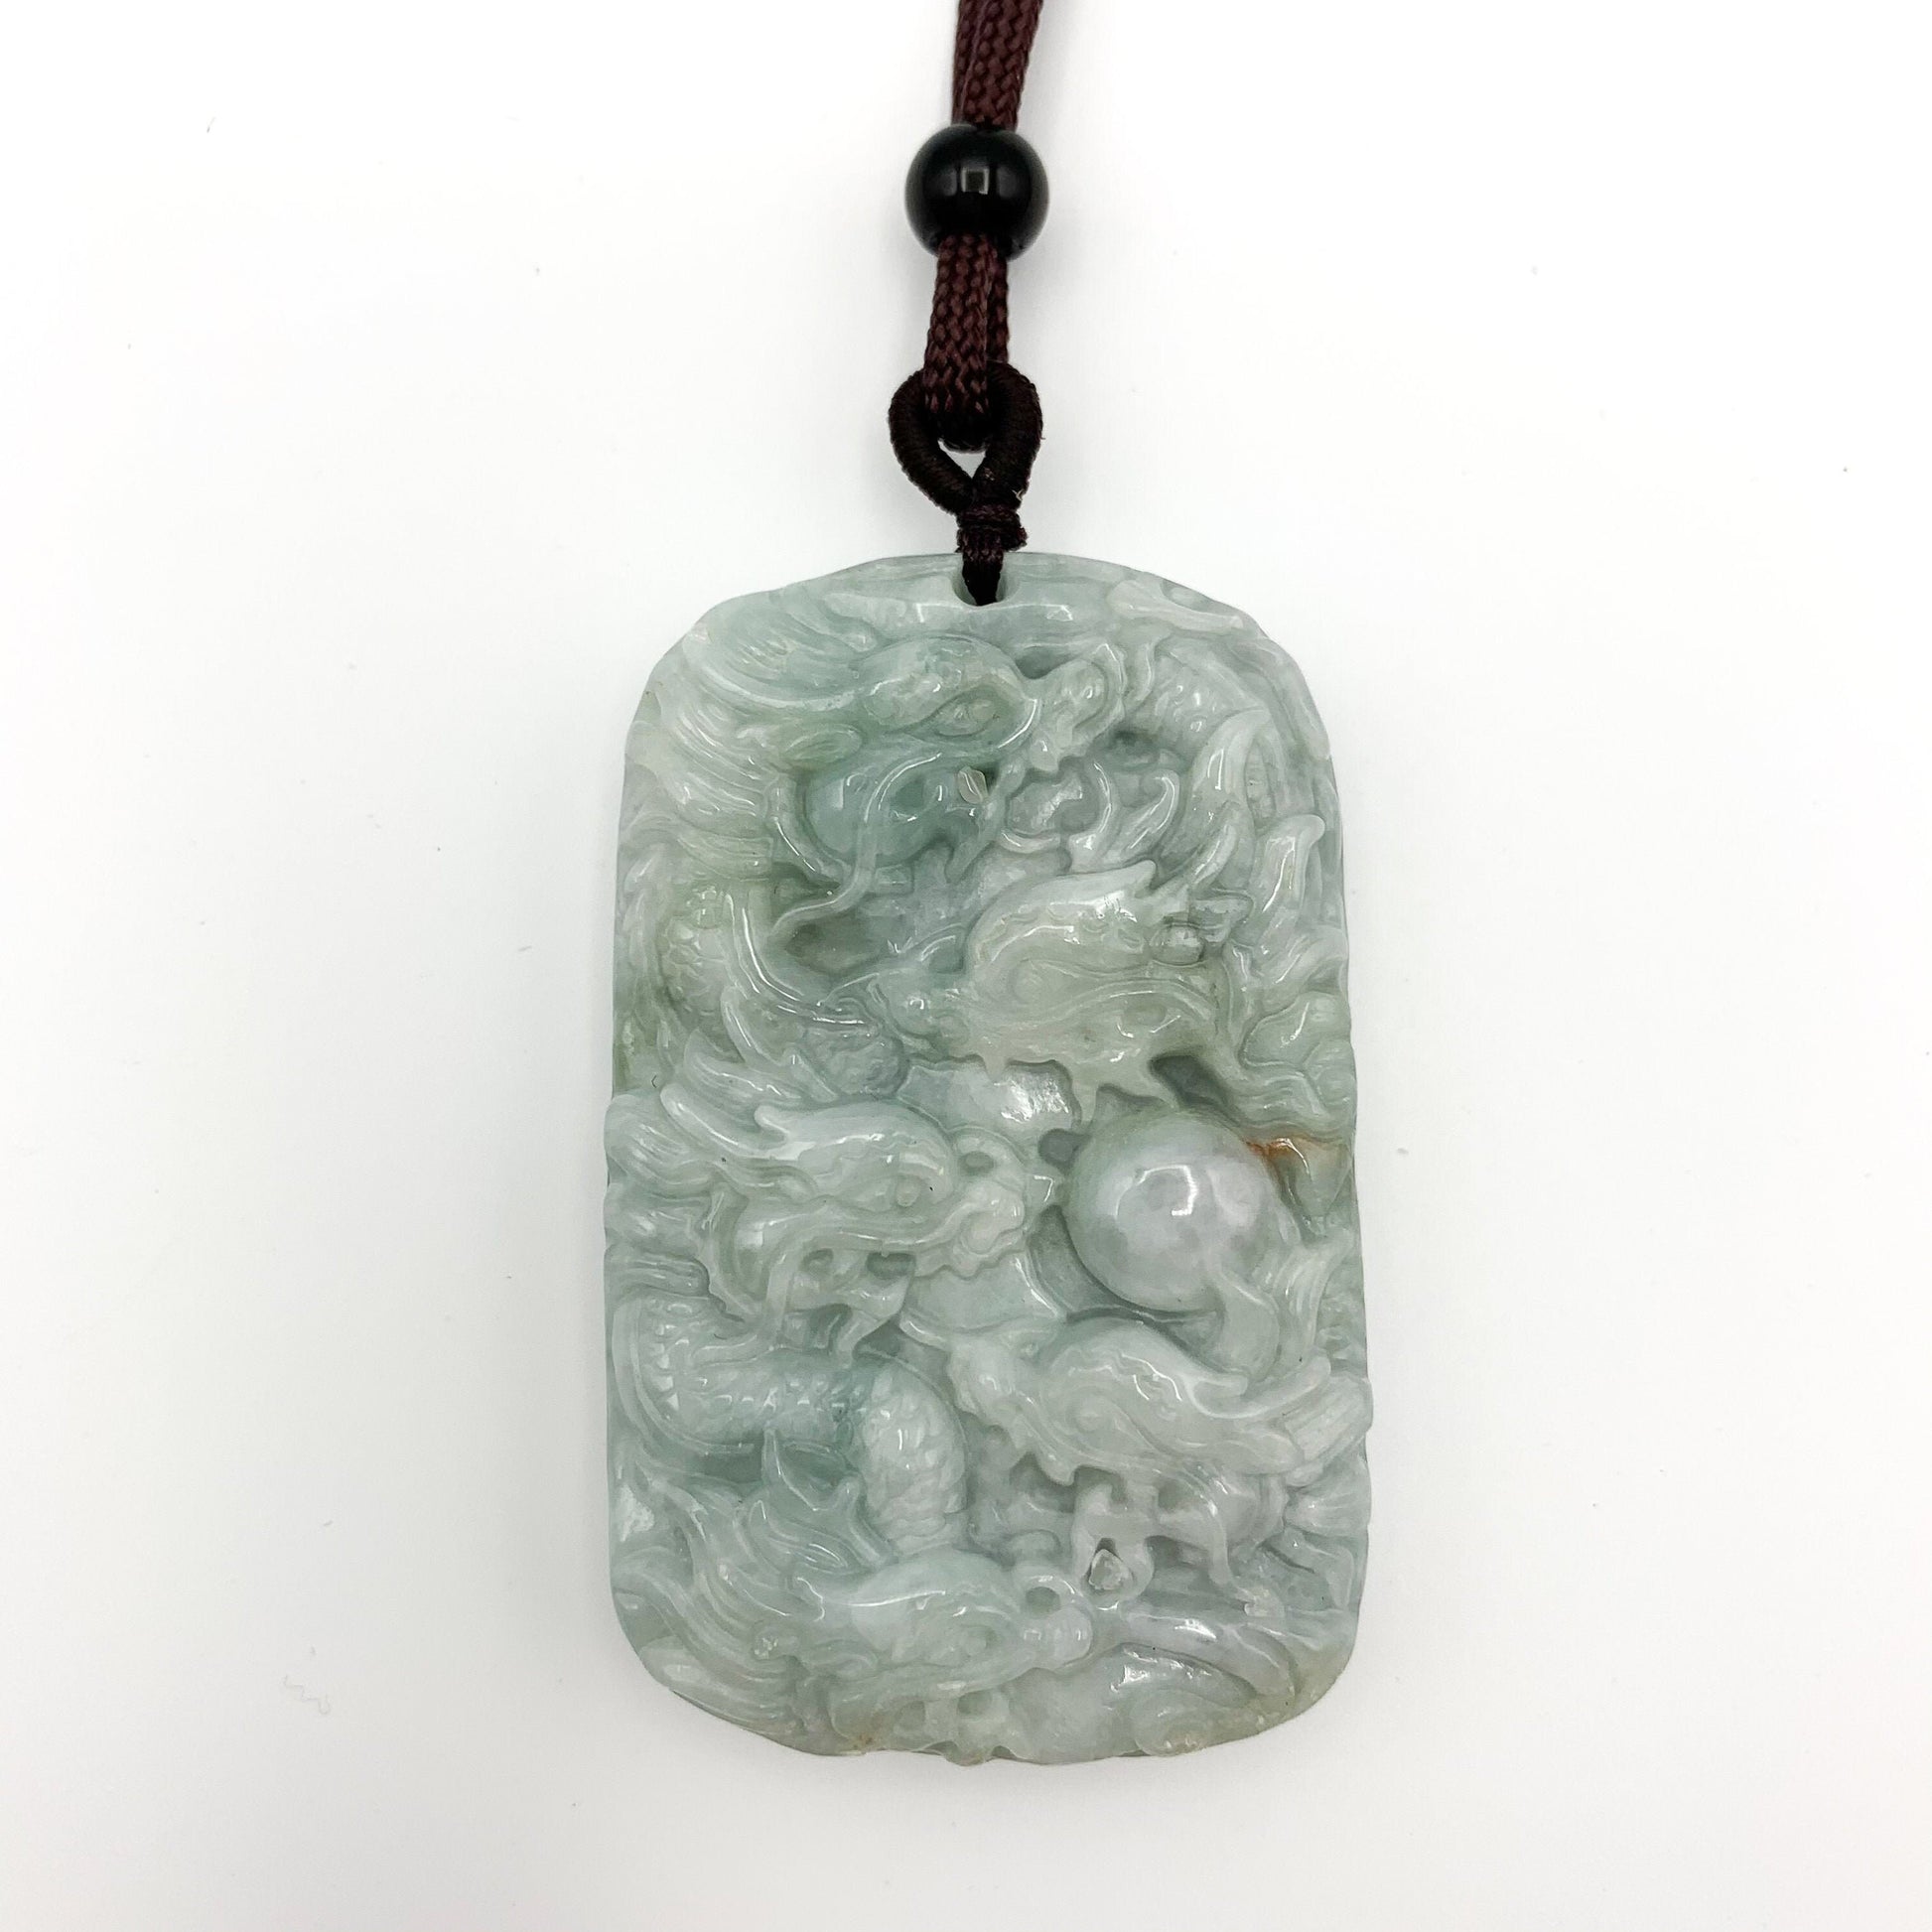 9 Dragon Jadeite Jade Chinese Zodiac Hand Carved Pendant Necklace, YJ-0321-0343576 - AriaDesignCollection